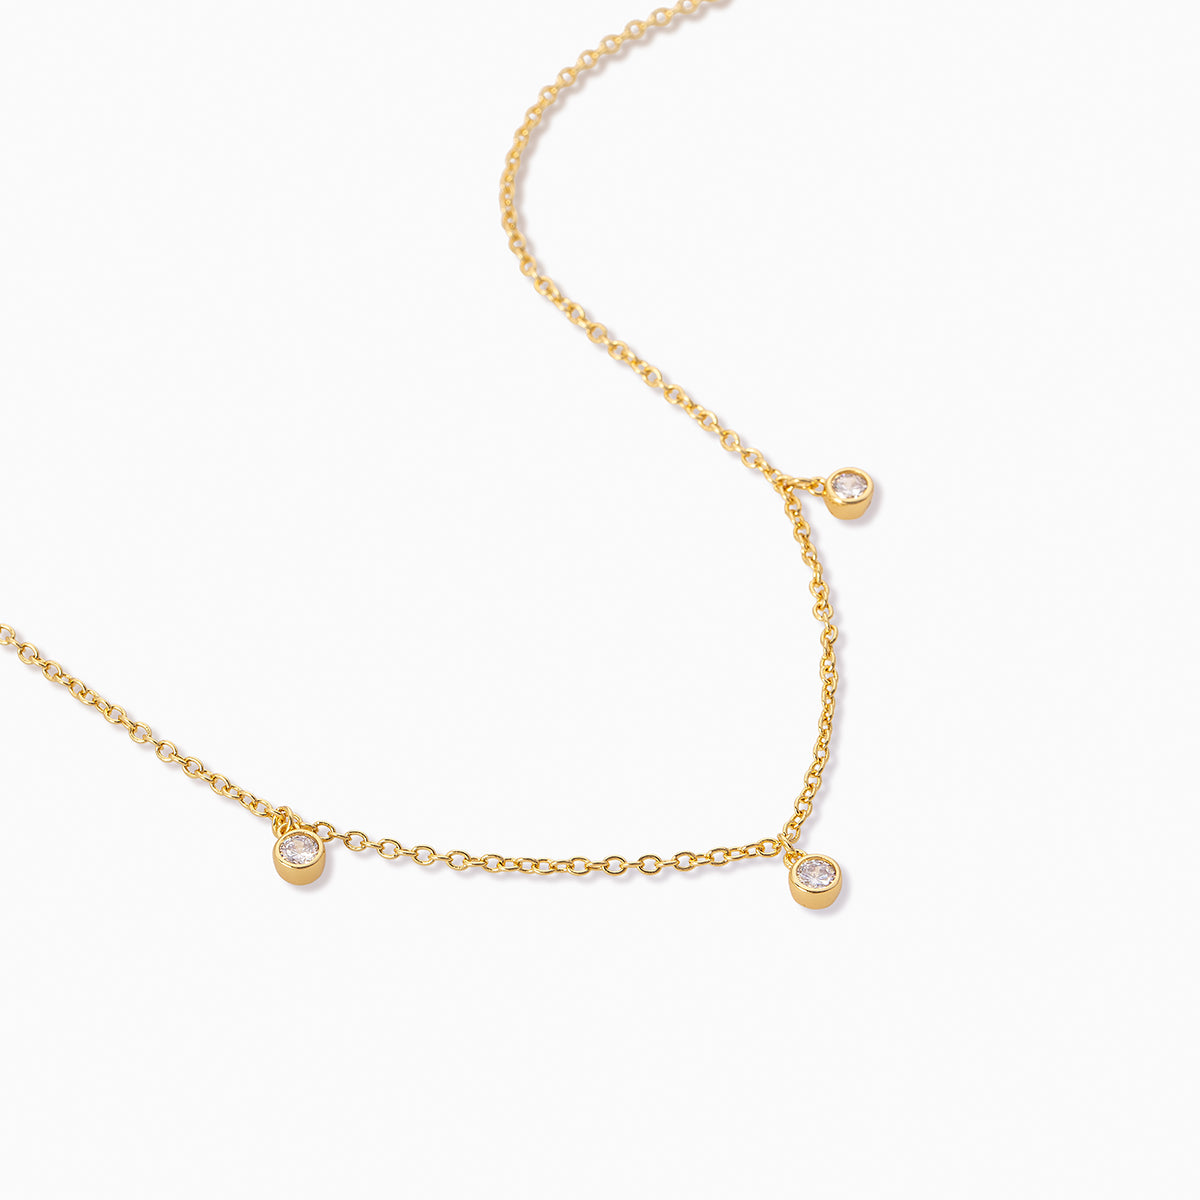 Level Up Necklace | Gold | Product Detail Image | Uncommon James